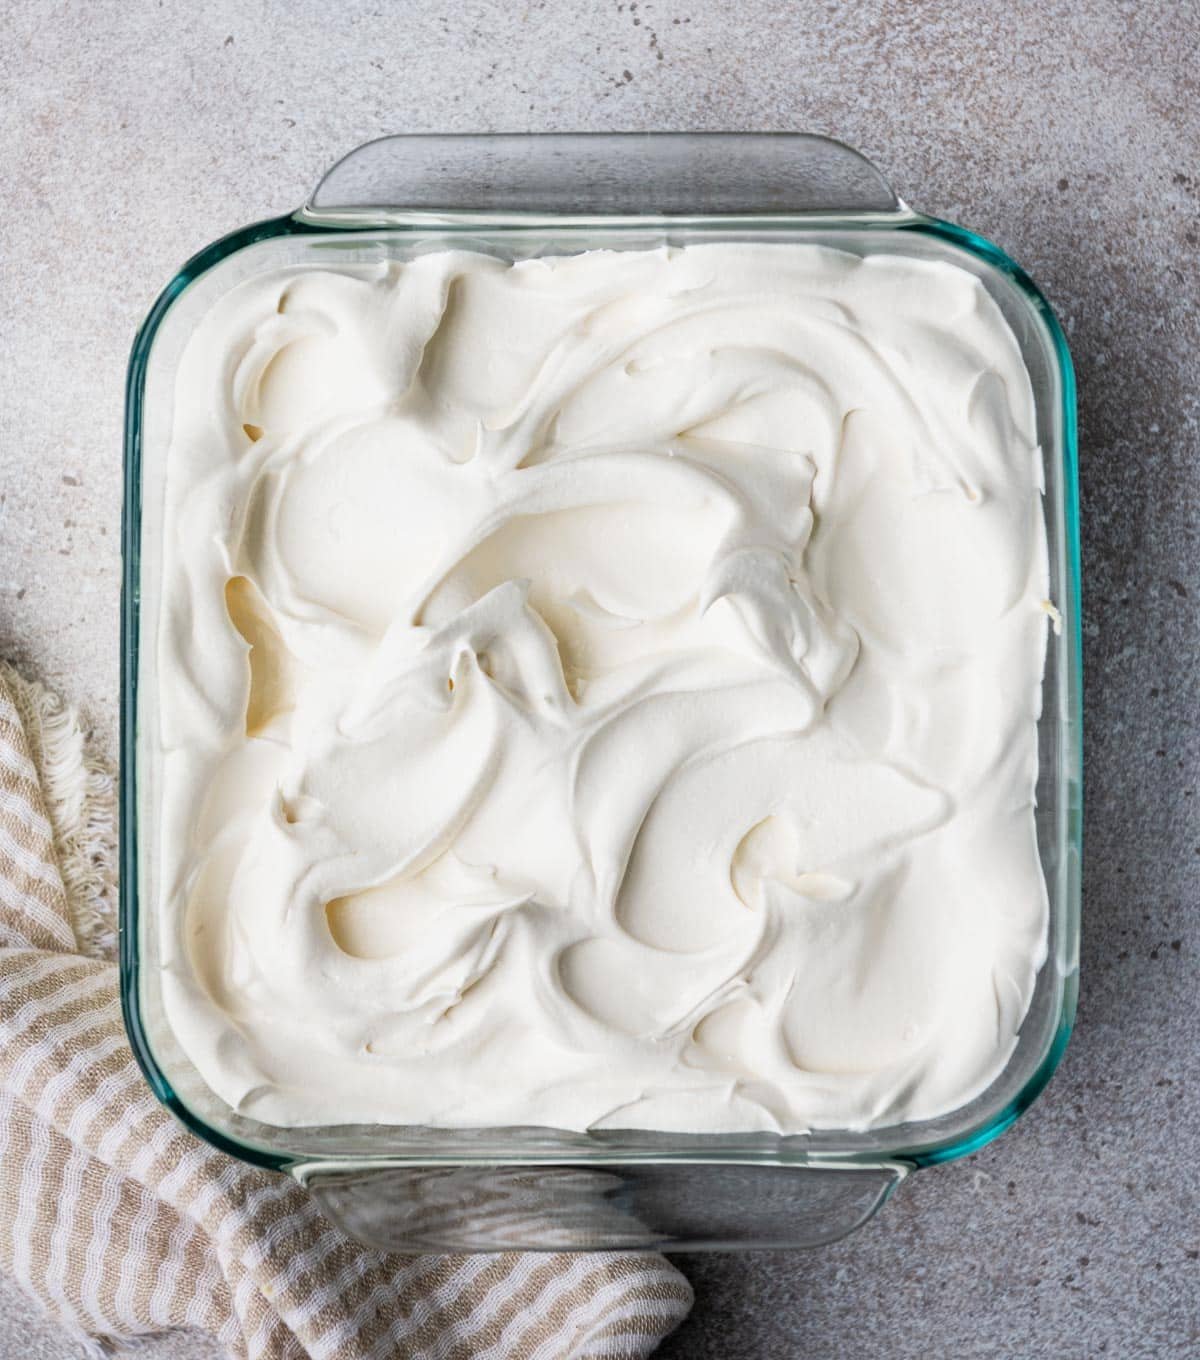 Adding cool whip to the top of a key lime icebox cake.